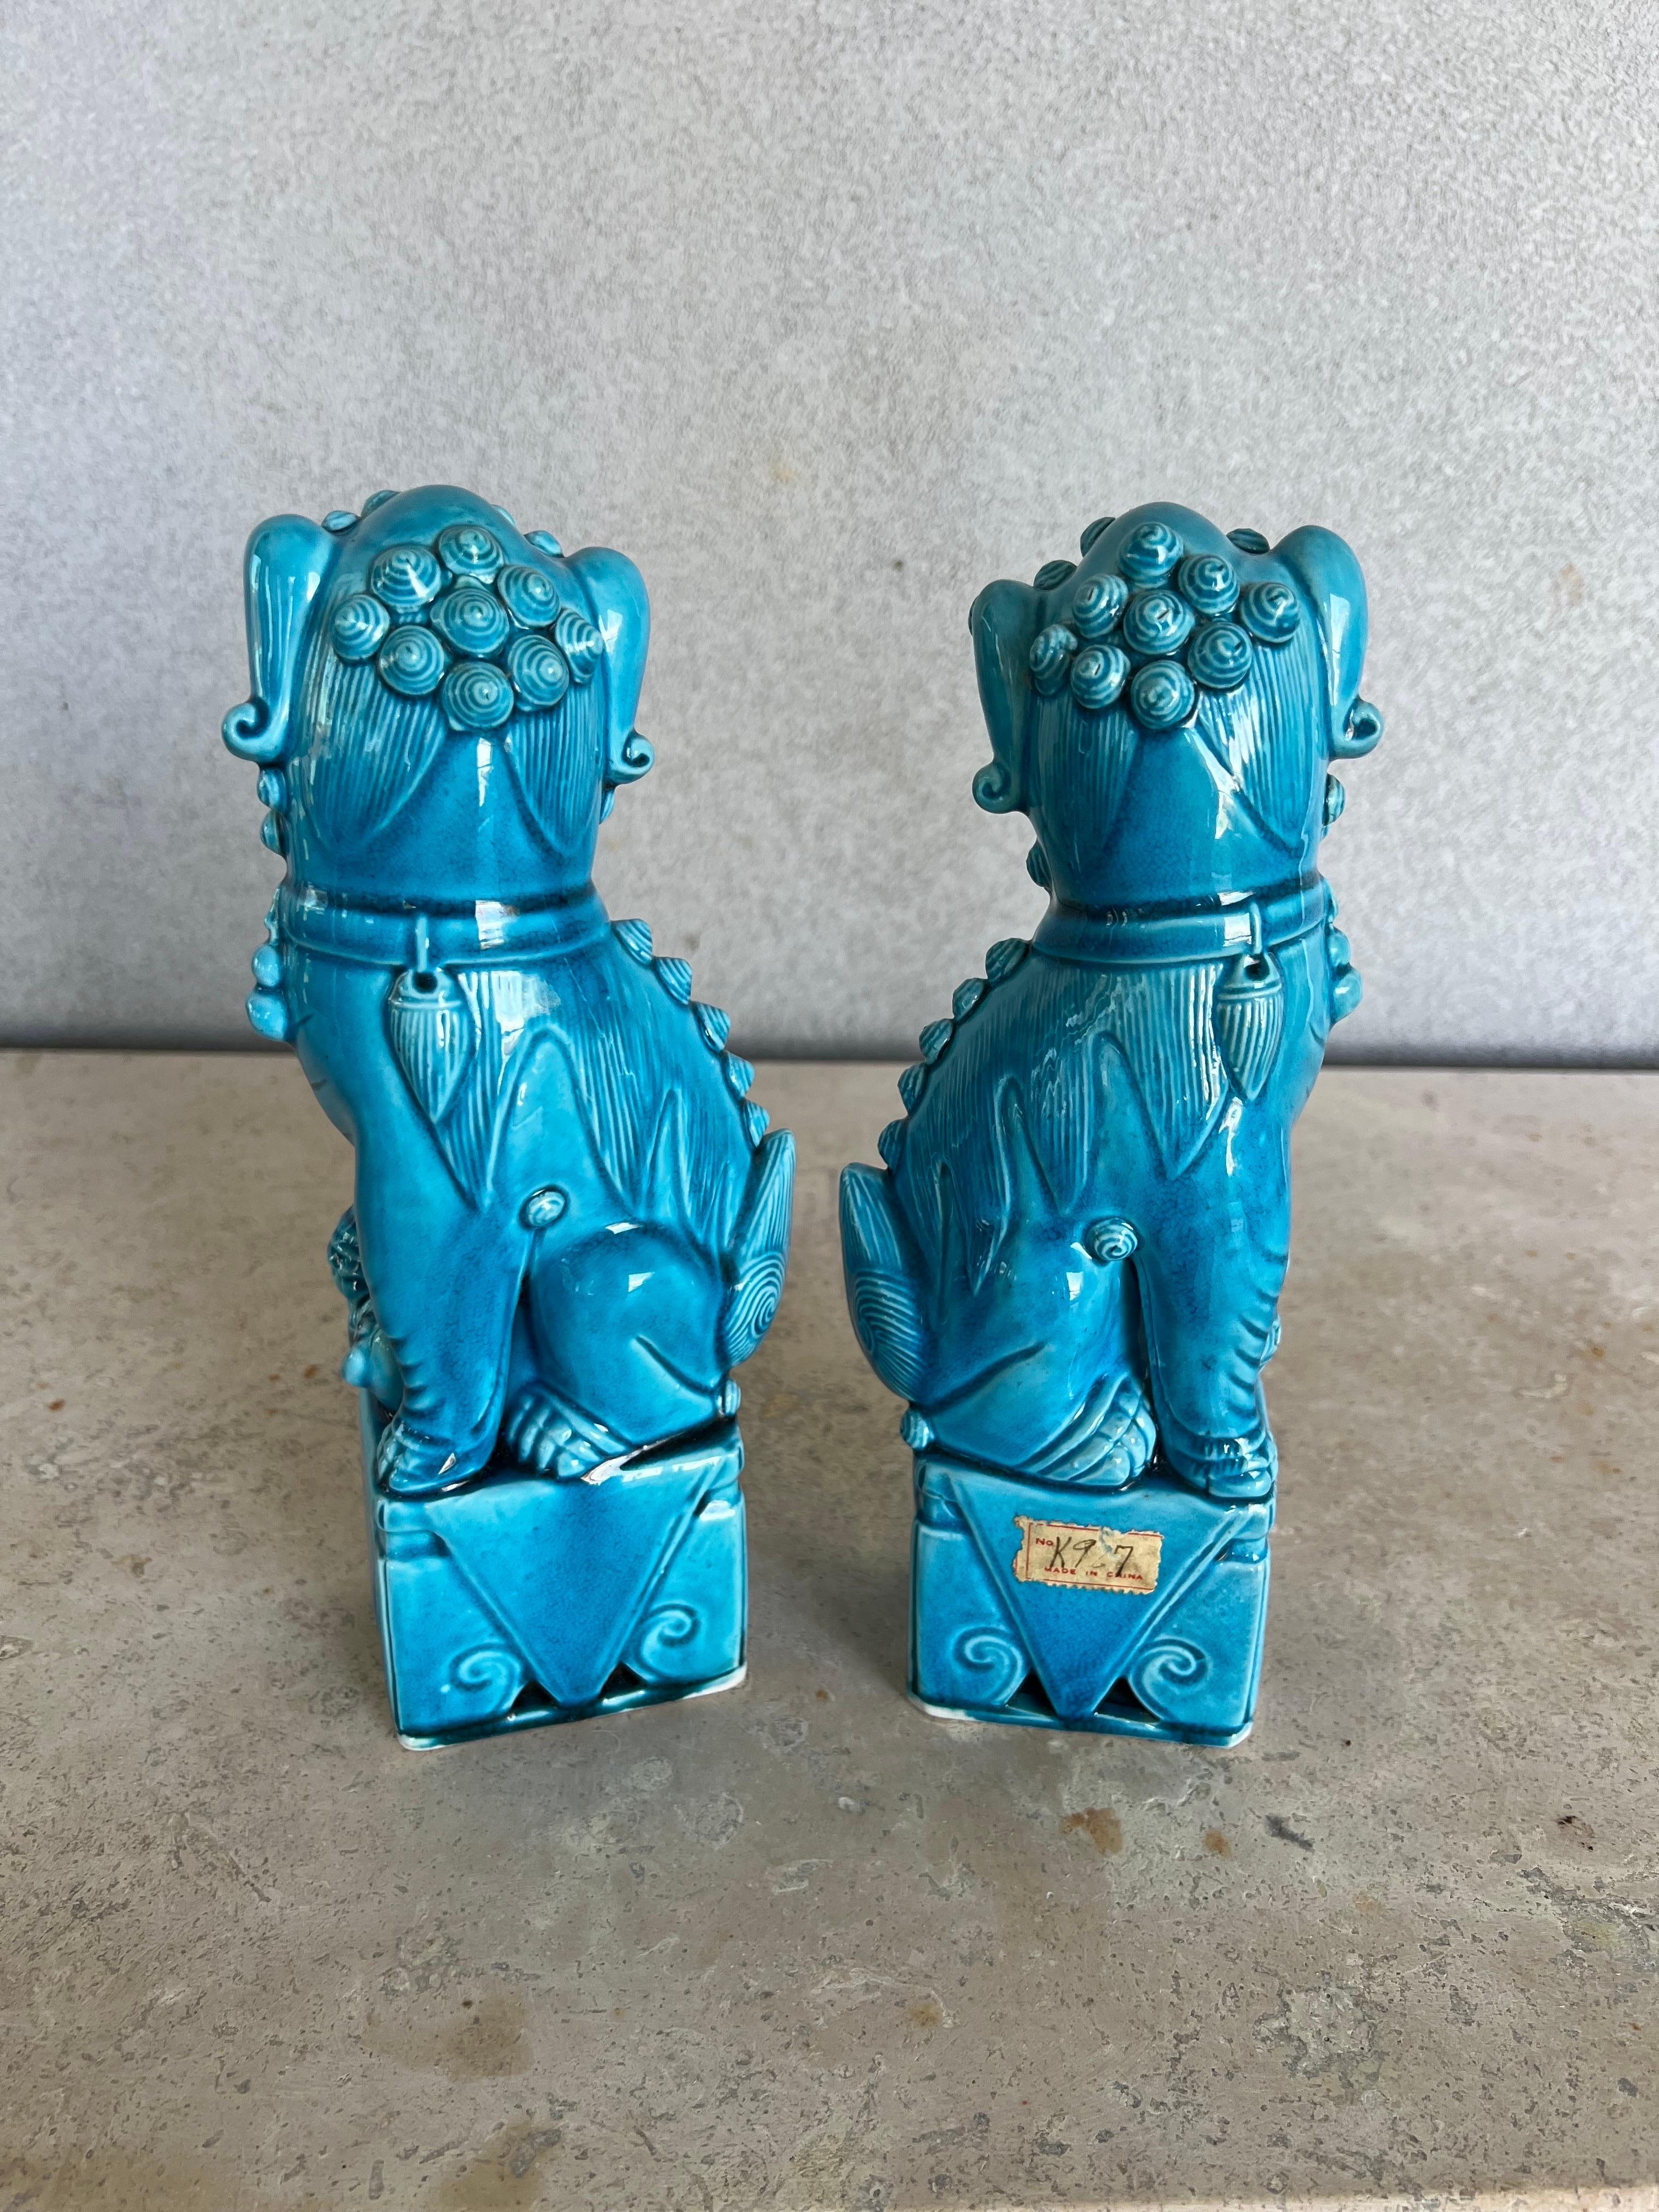 Chinese Export Chinese Foo Dog statues in turquoise glaze